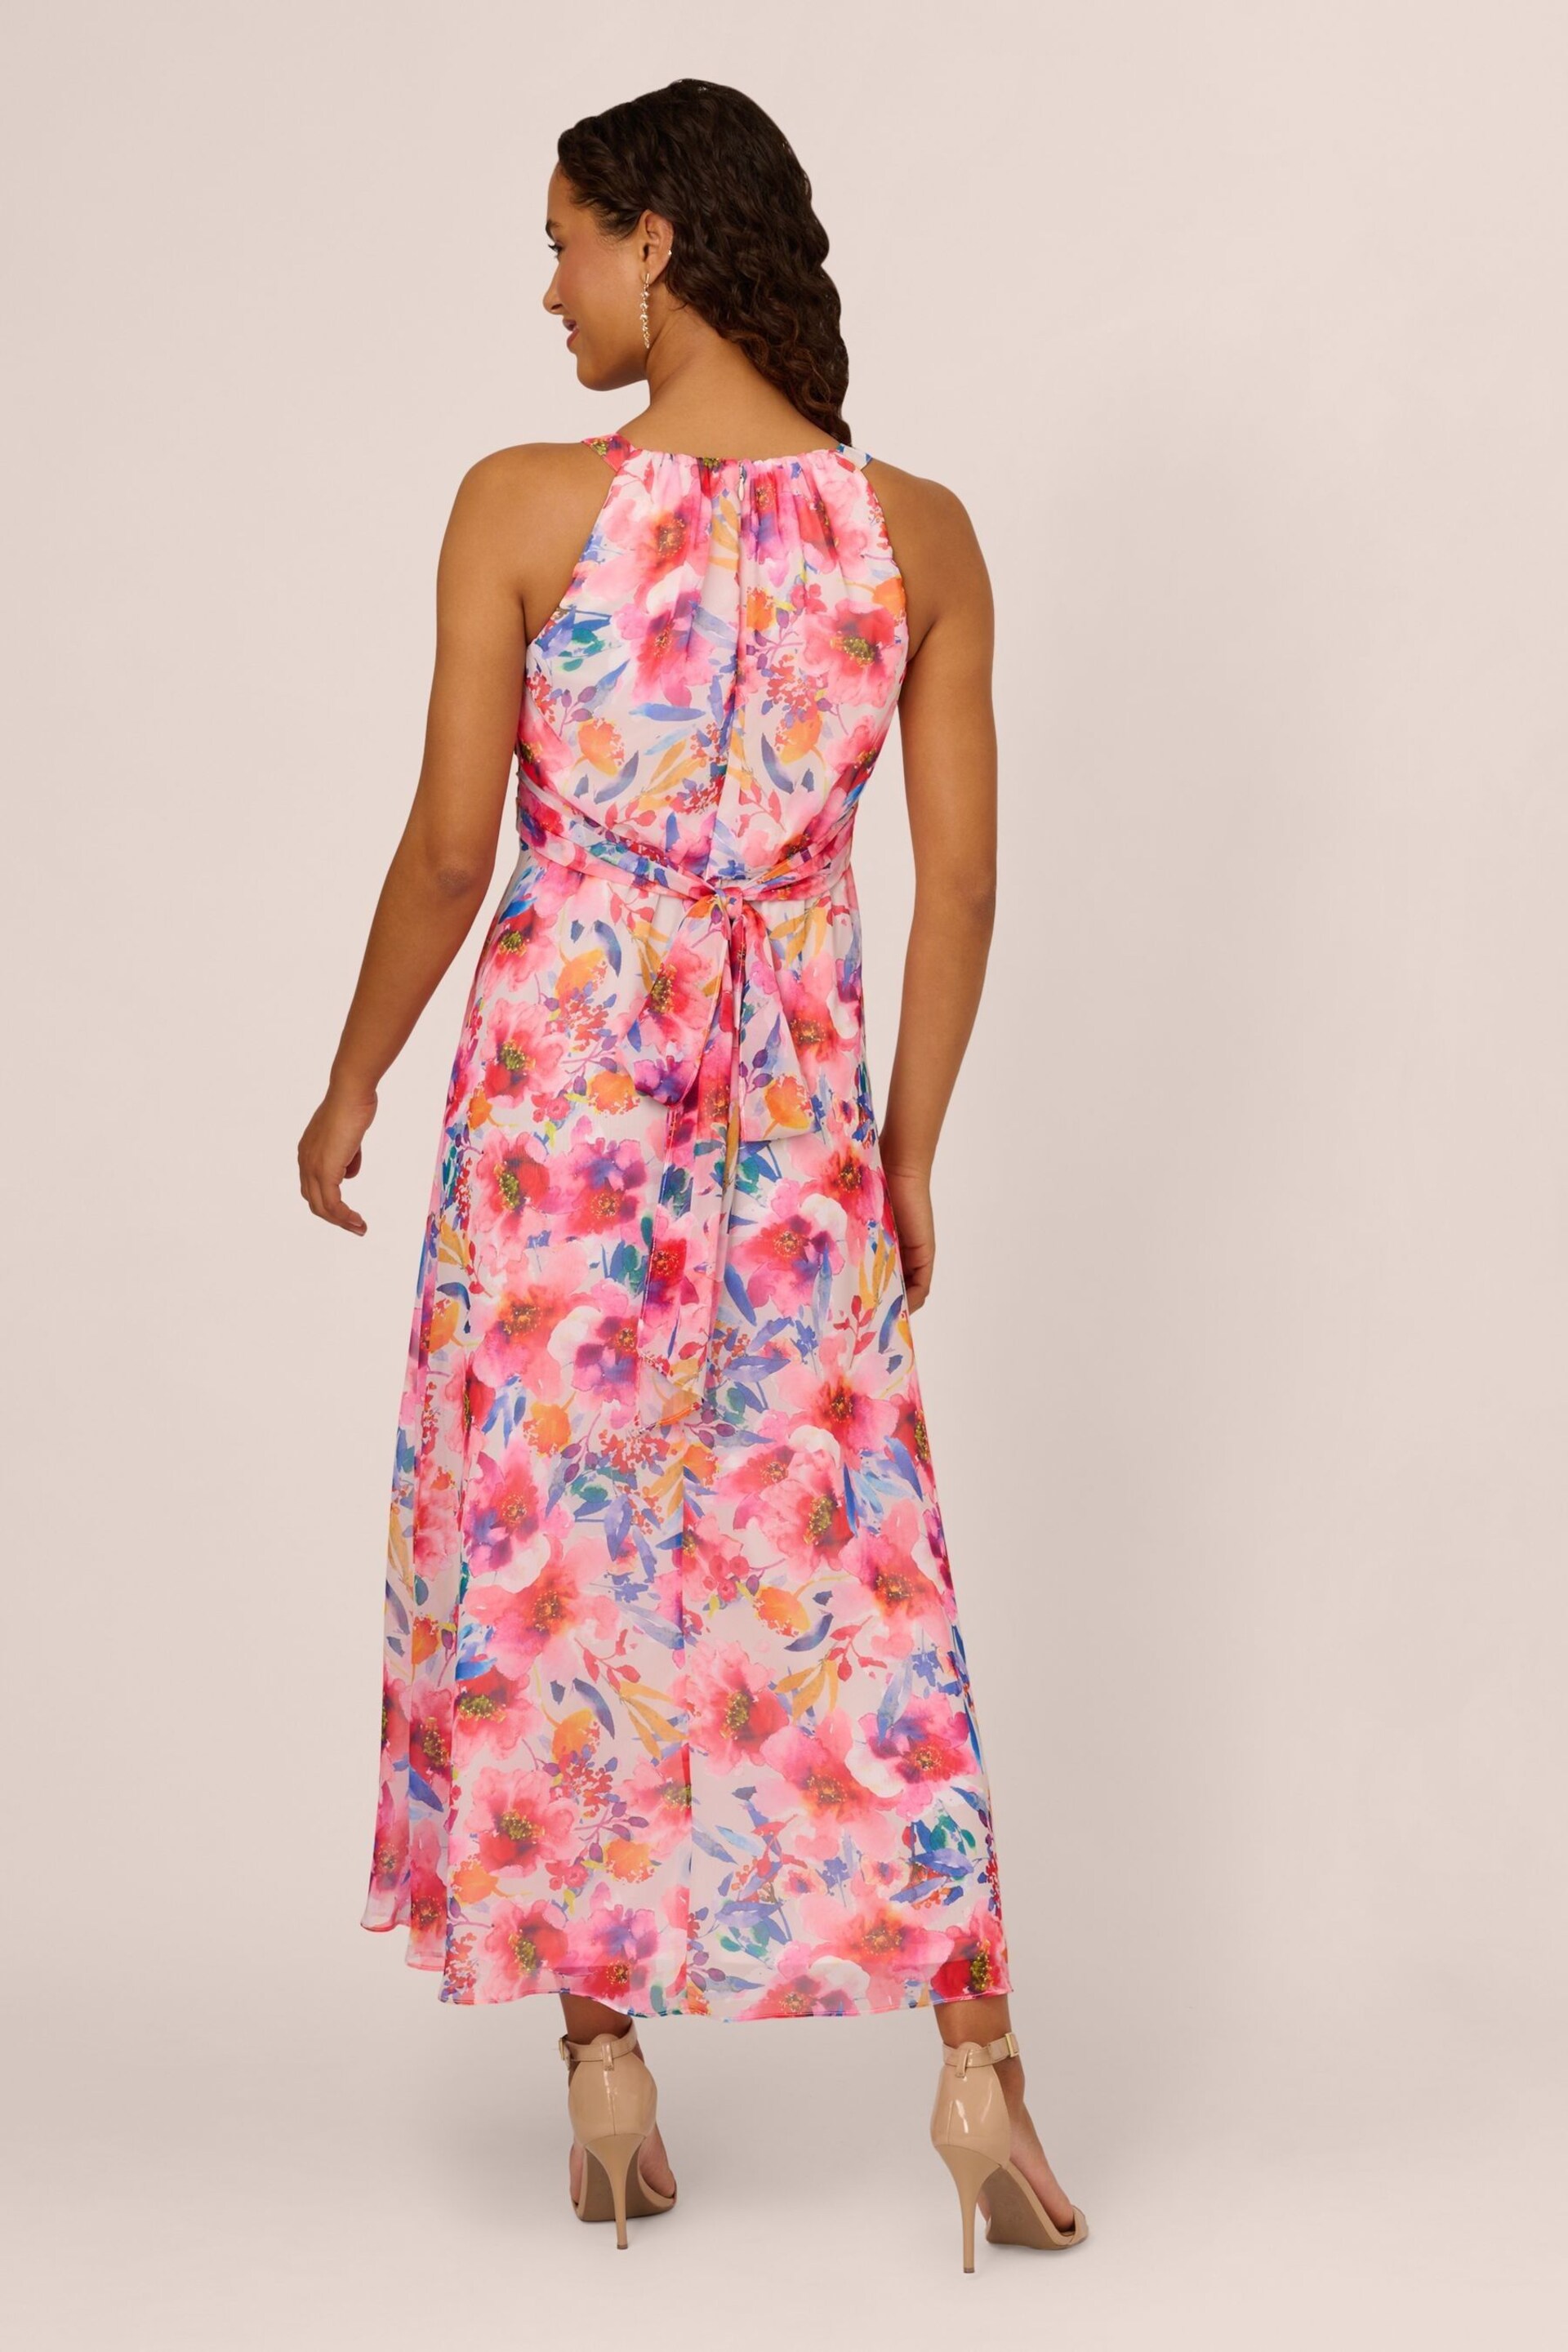 Adrianna Papell Floral Chiffon Halter White Dress - Image 2 of 7